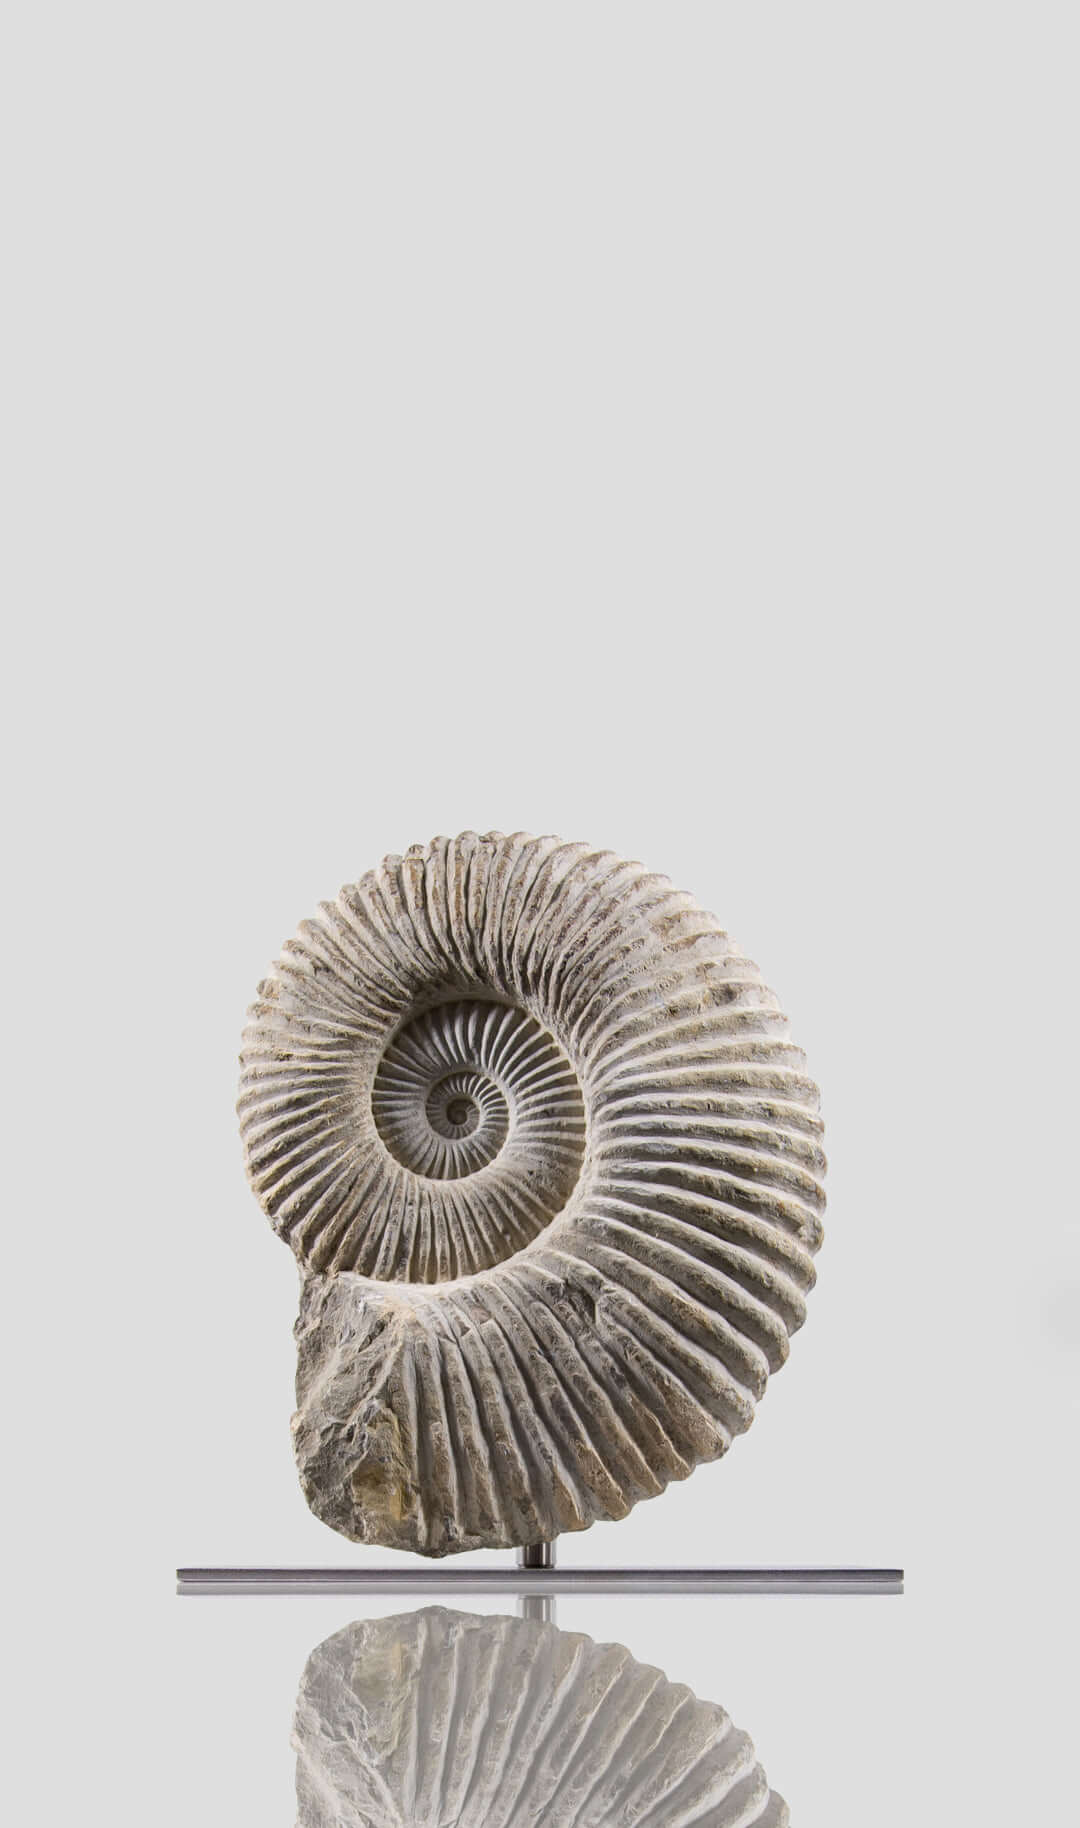 mantelliceras ammonite for sale on stainless steel swivel stand 04